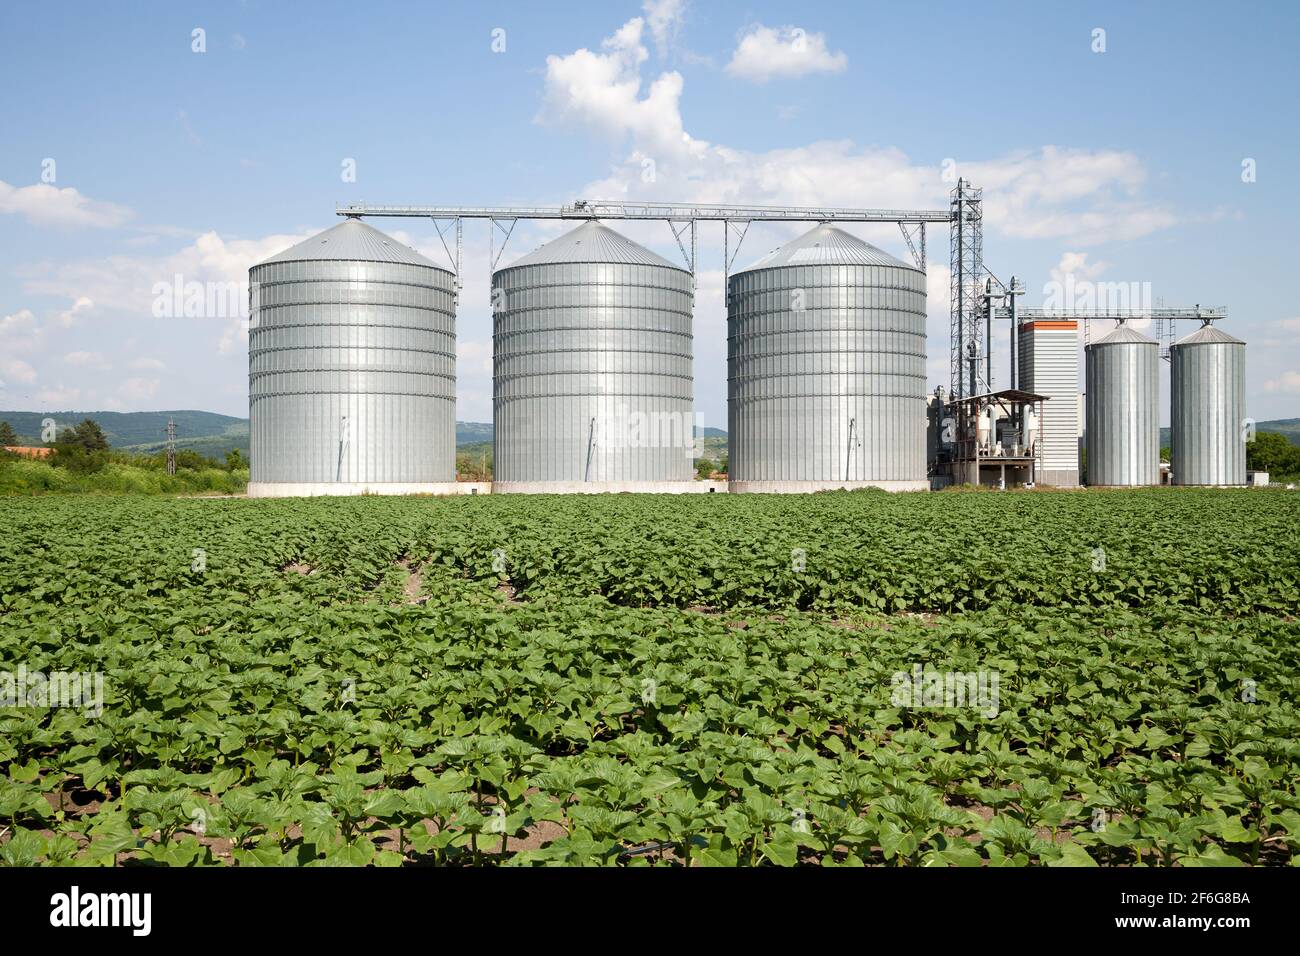 Agricultural Silo - Building Exterior, Storage and drying of grains, wheat, corn, soy, sunflower against the blue sky with white clouds Stock Photo